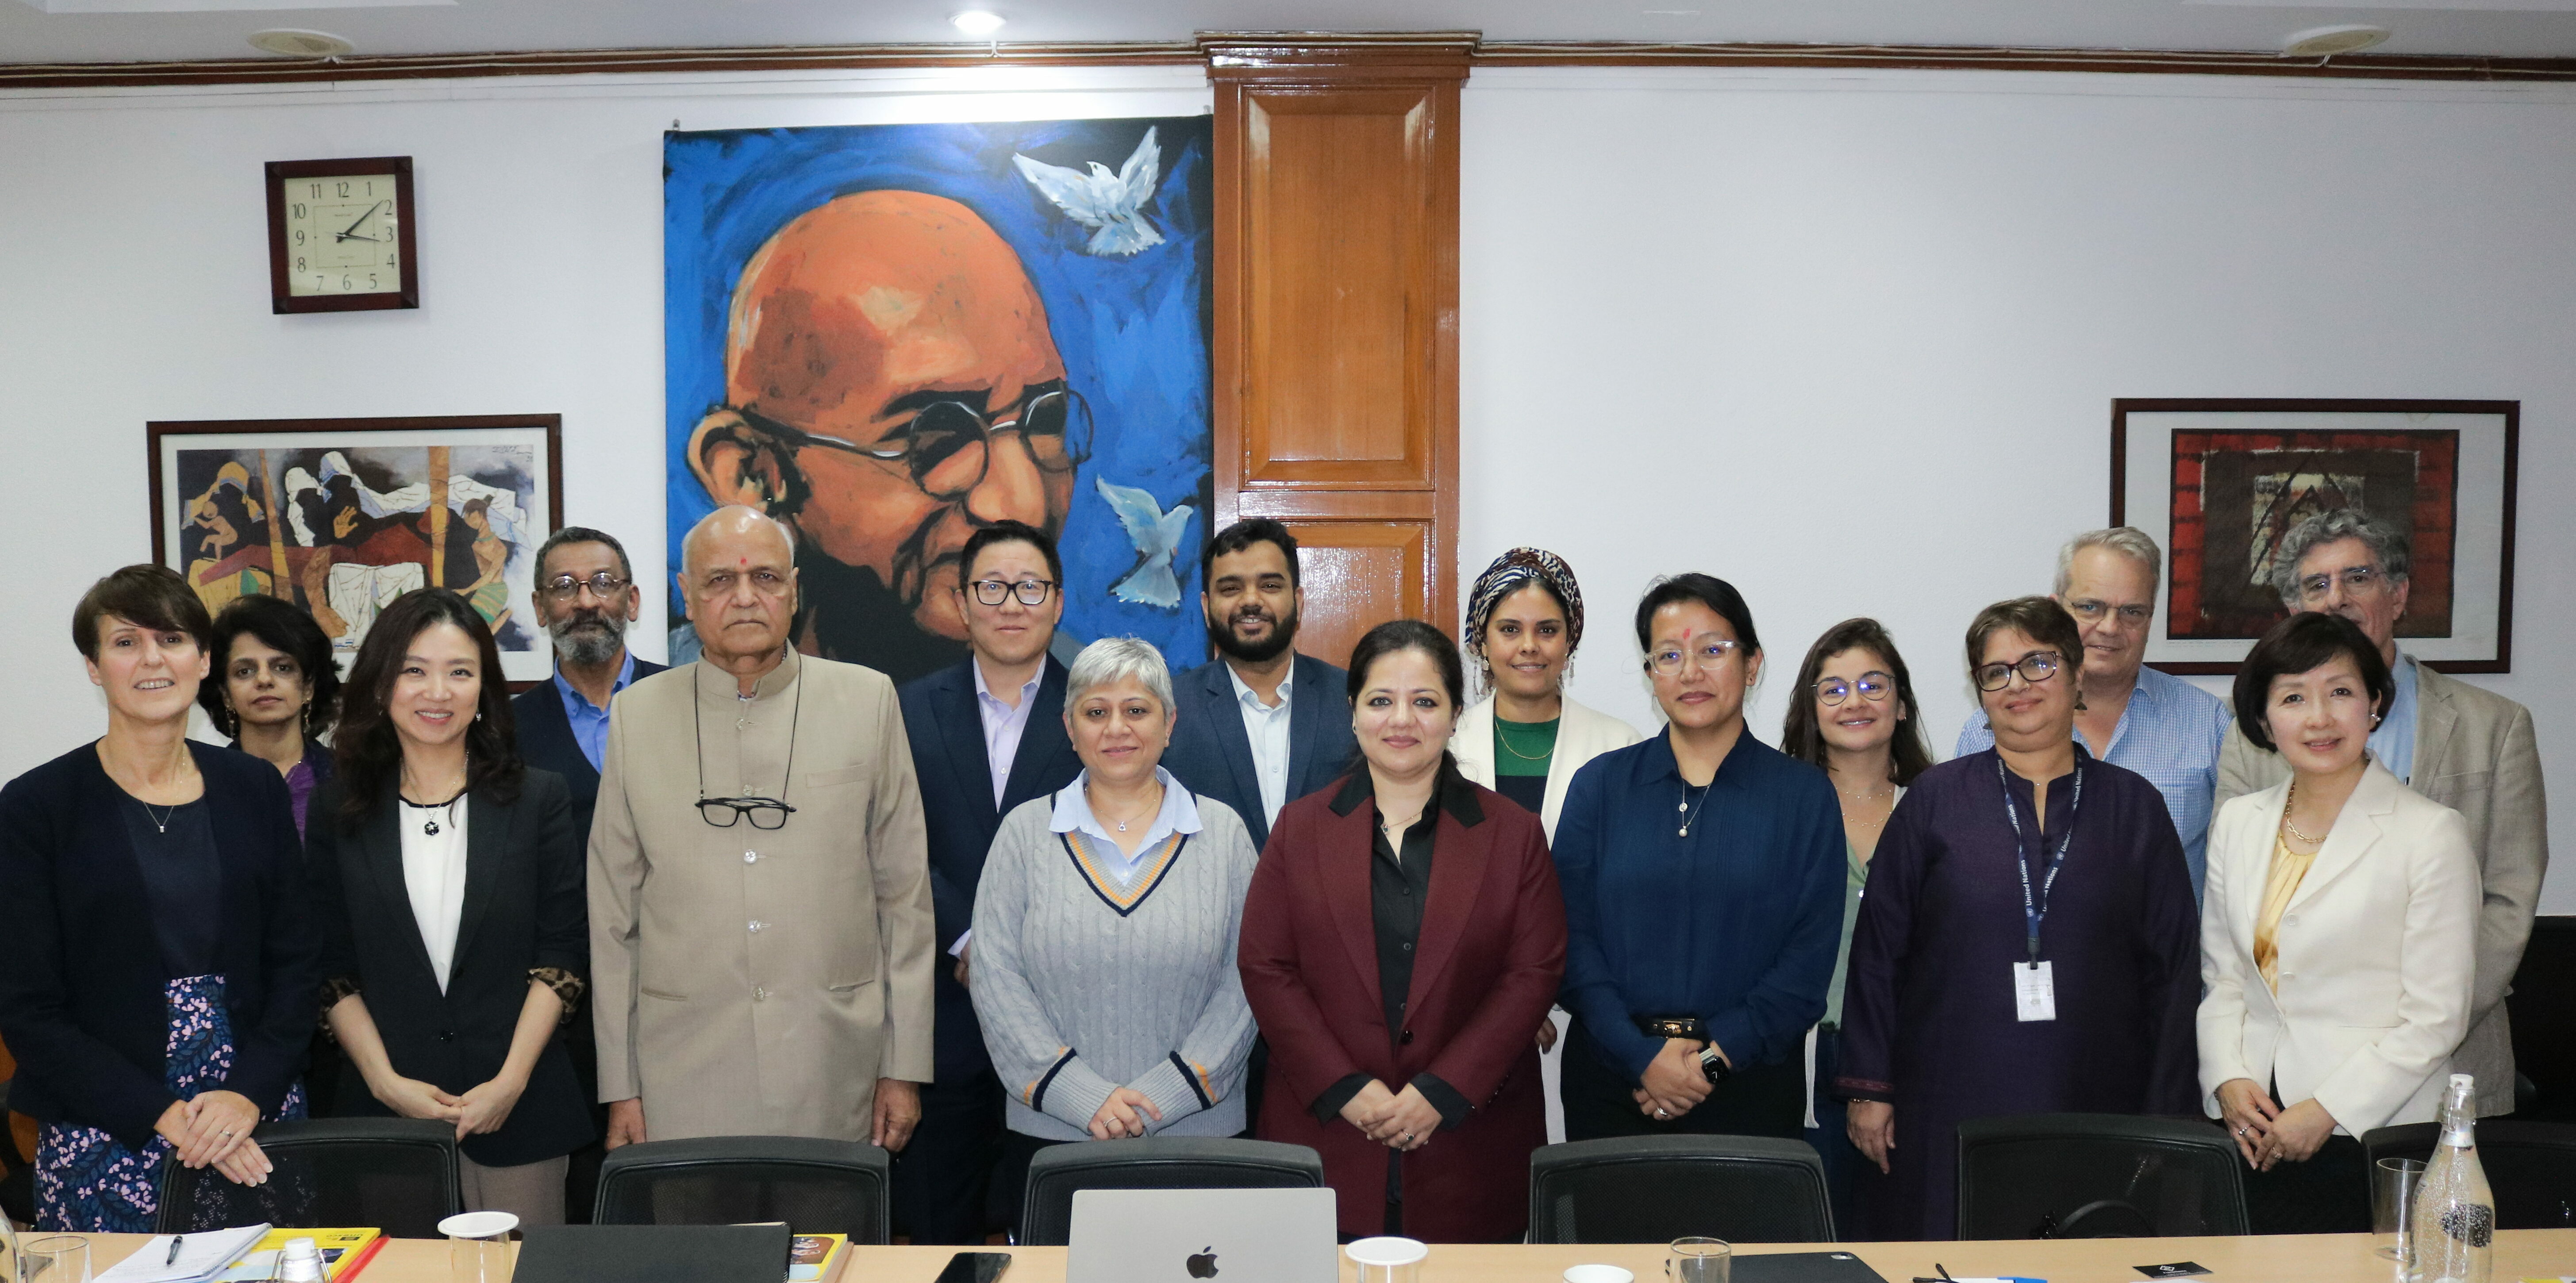 Davidson along with fellow governing board members for The Mahatma Gandhi Institute for Education of Peace and Sustainable Development, based in Delhi.